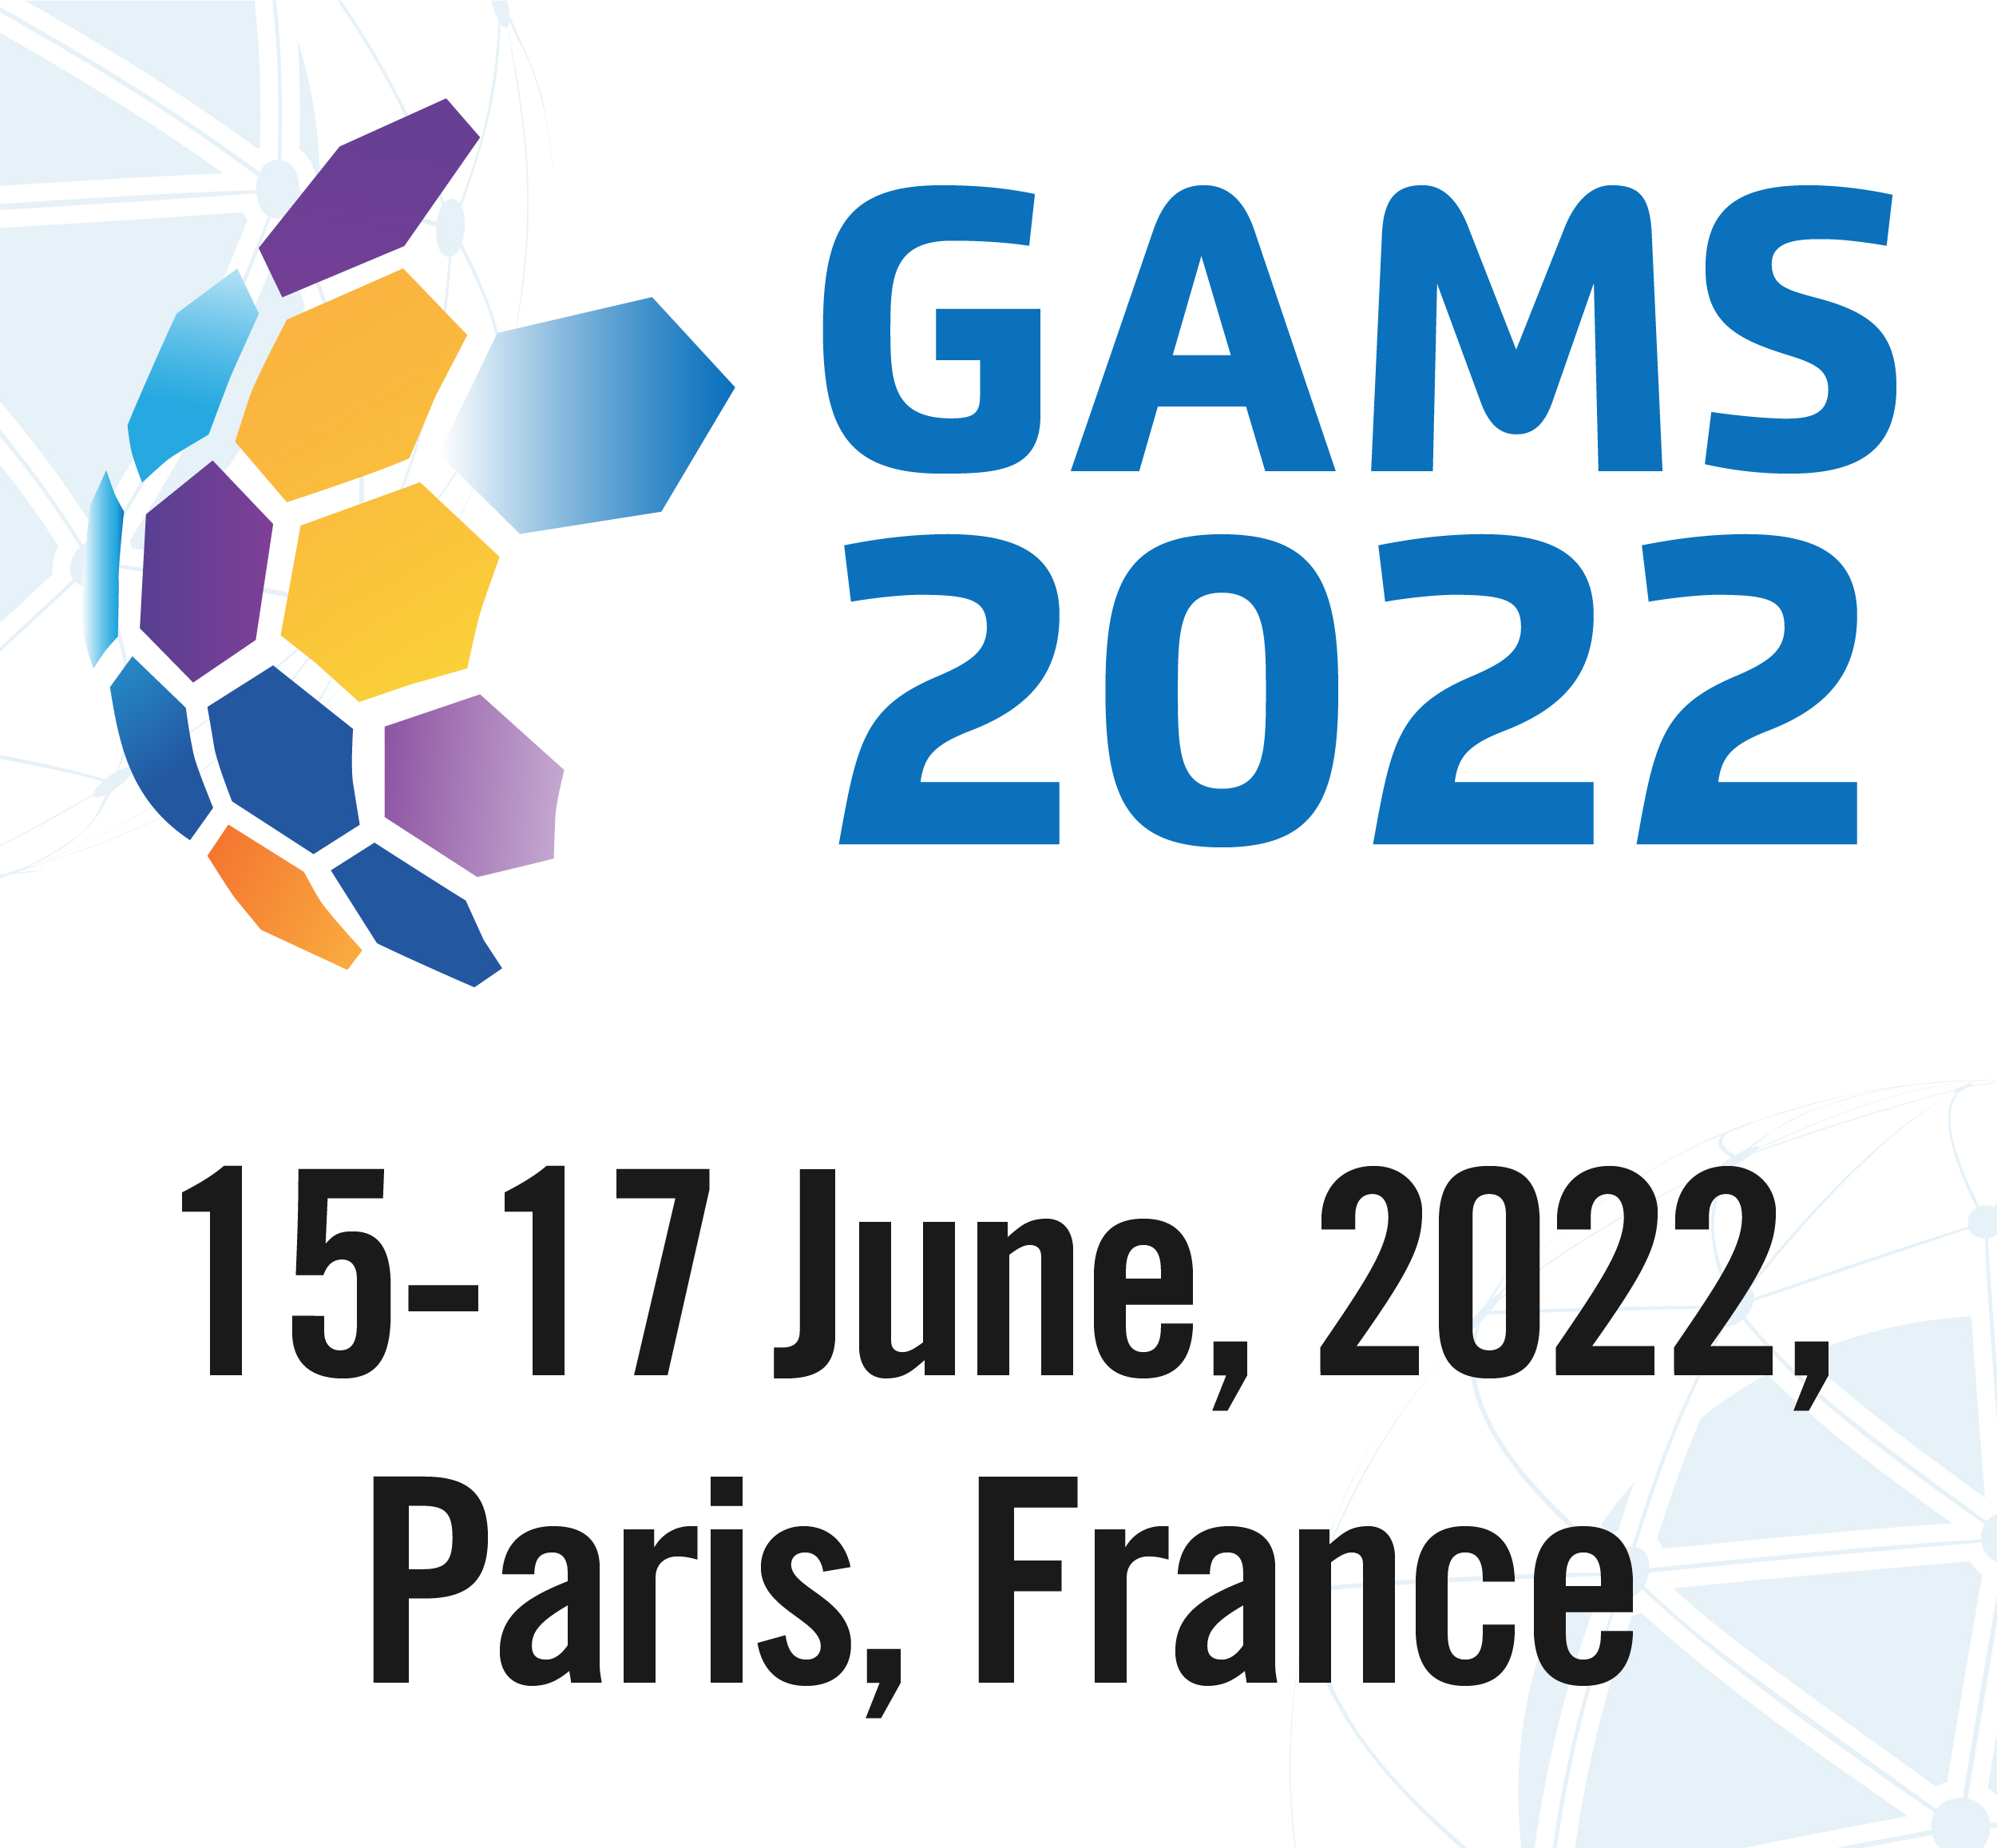 The Global Advanced Materials & Surfaces International Conference - GAMS 2022